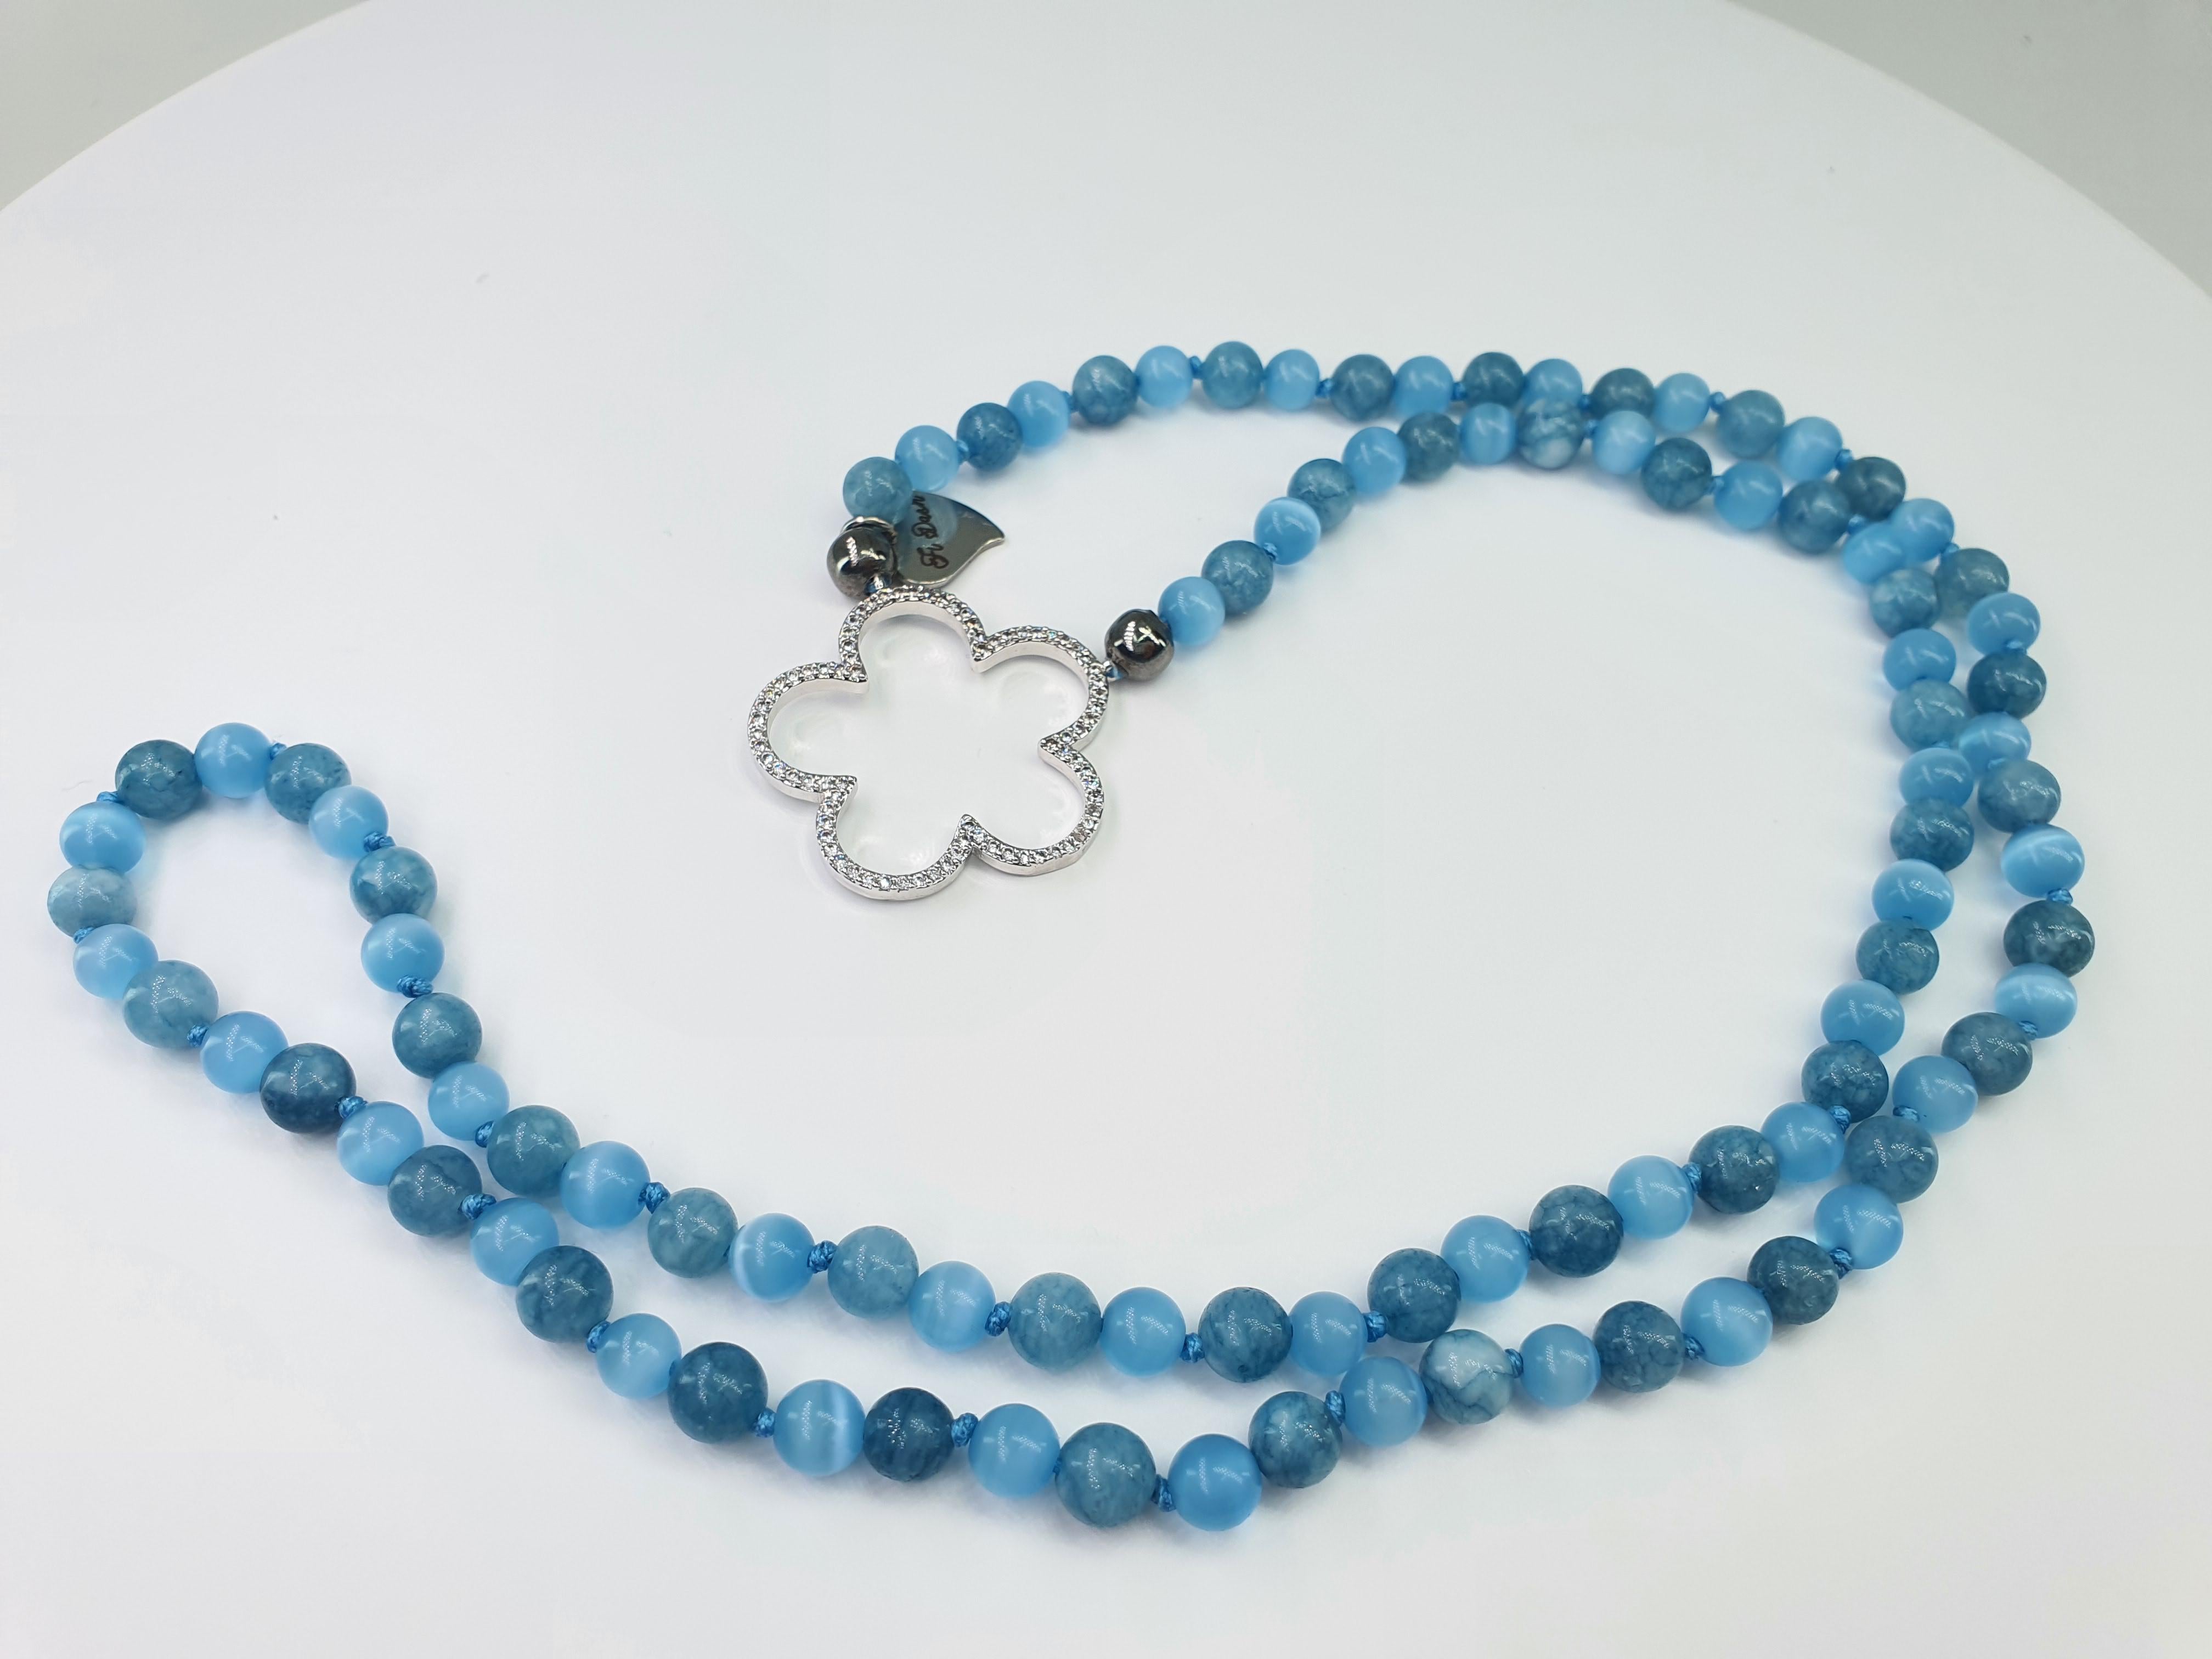 This beautiful fashion aquamarine and light blue cat eye beads Sunglasses Necklace with flower can be used as a necklace or as a pendant for carrying sun glasses, as well as an accessory for a handbag. This necklace is carefully handcrafted by our